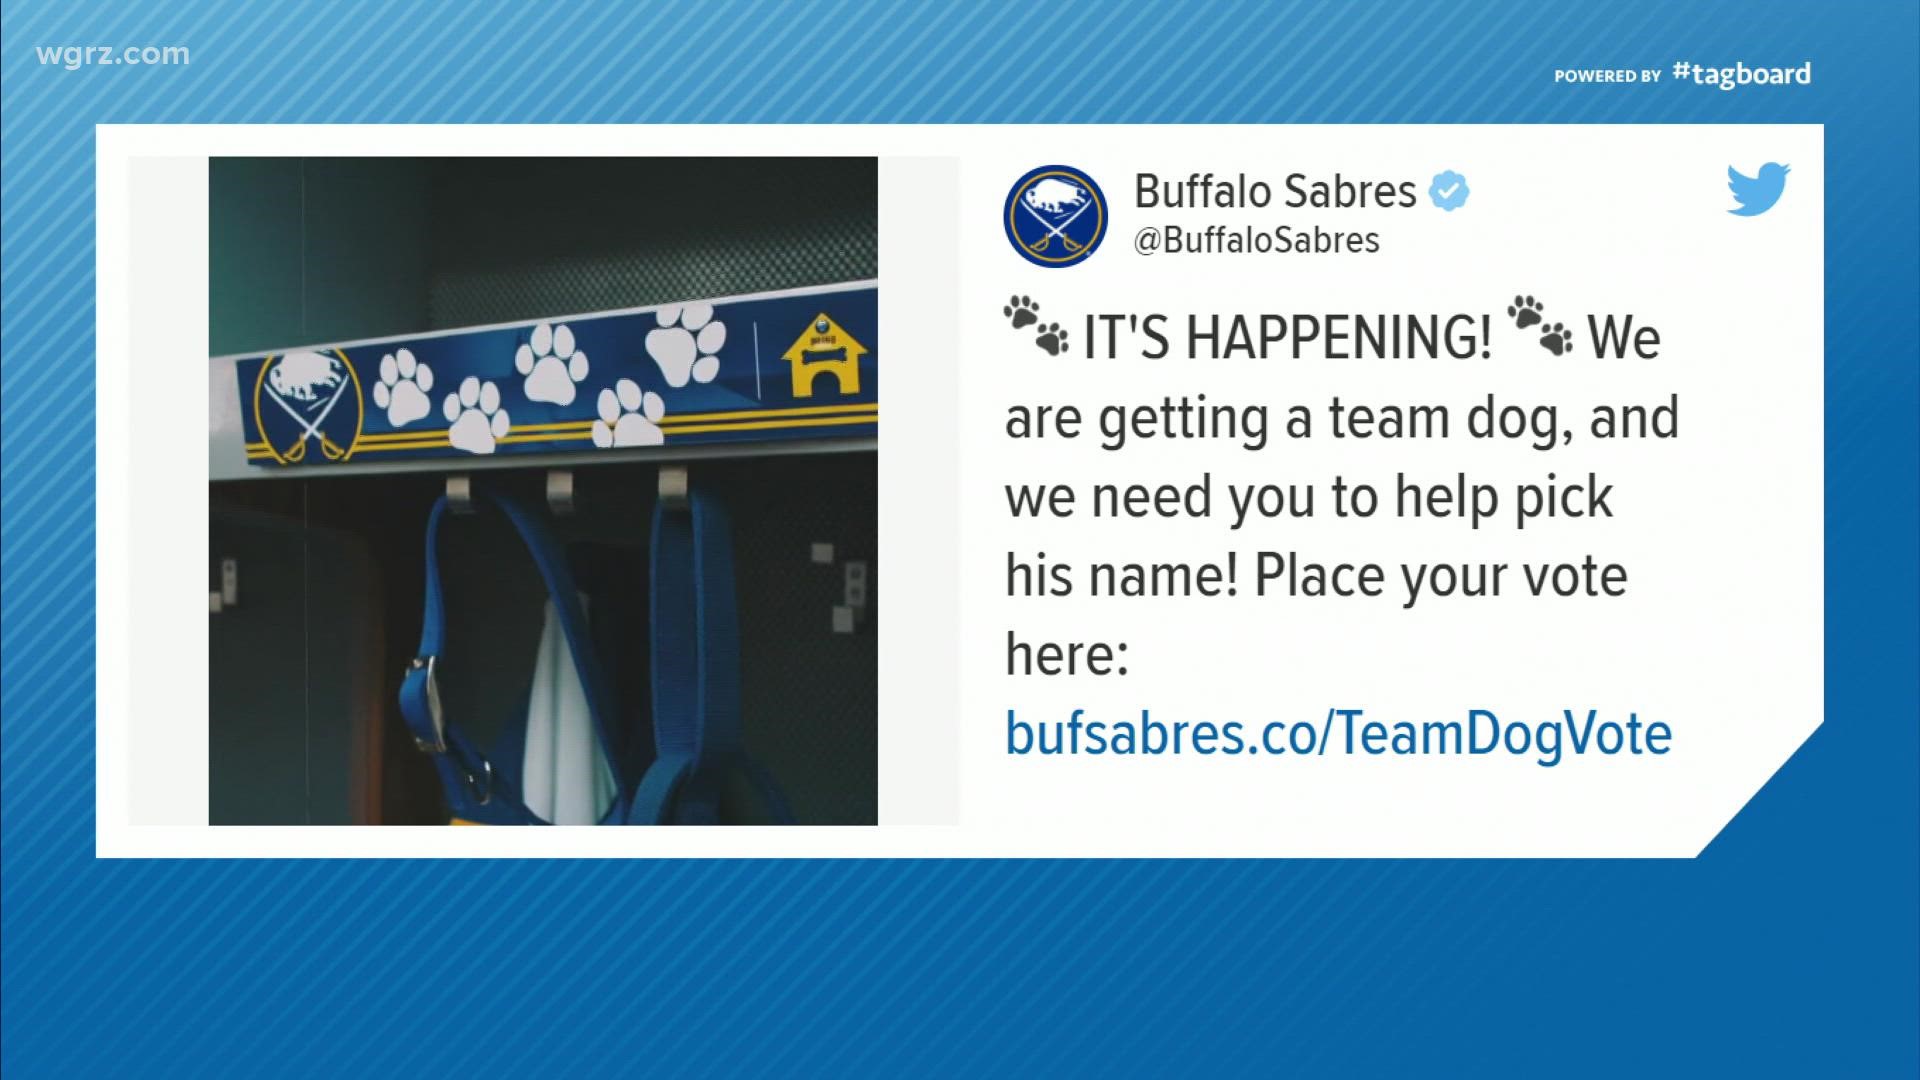 The Sabres are getting ready to welcome a new furry friend to their roster.